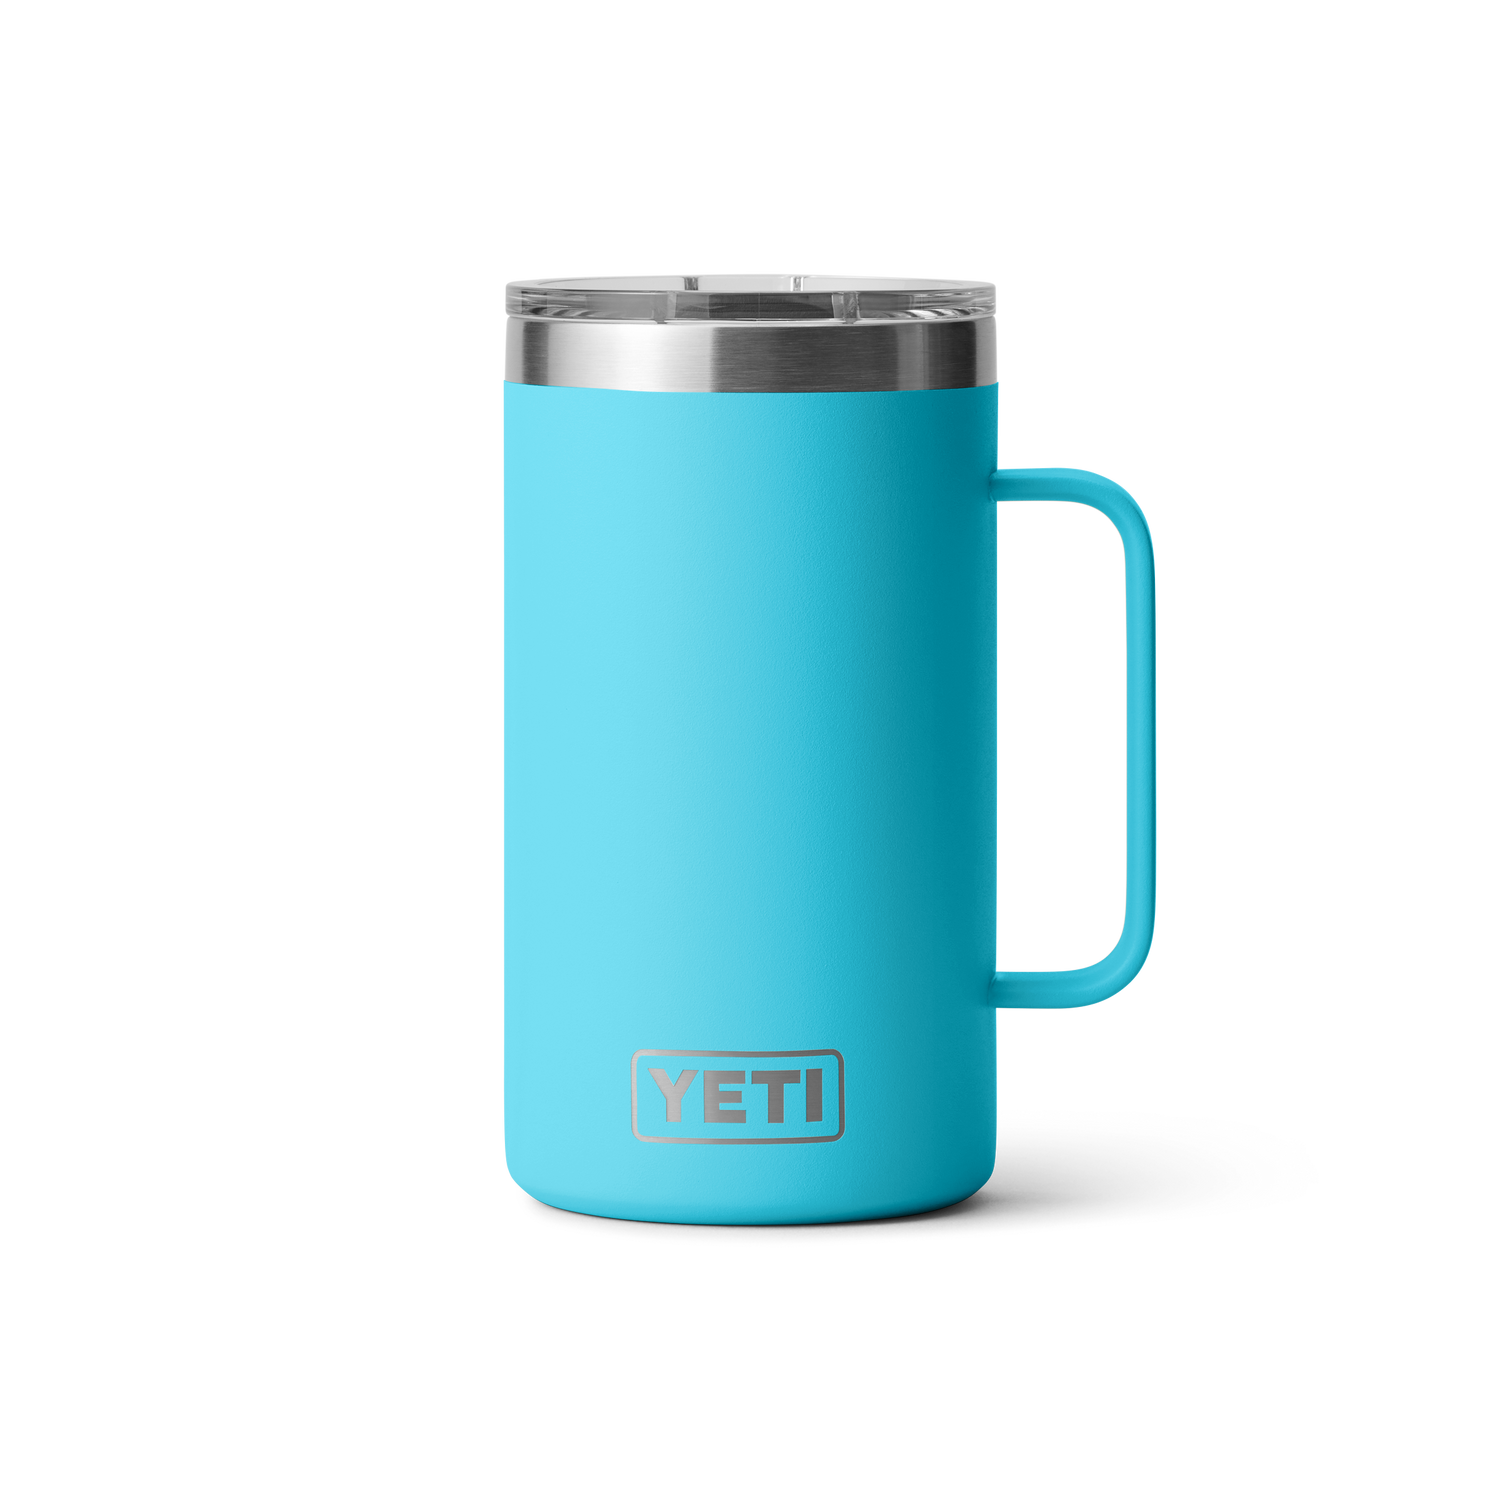 It pays living only an hour from where they ship from, got my new 10oz  stackable mugs already after ordering yesterday : r/YetiCoolers